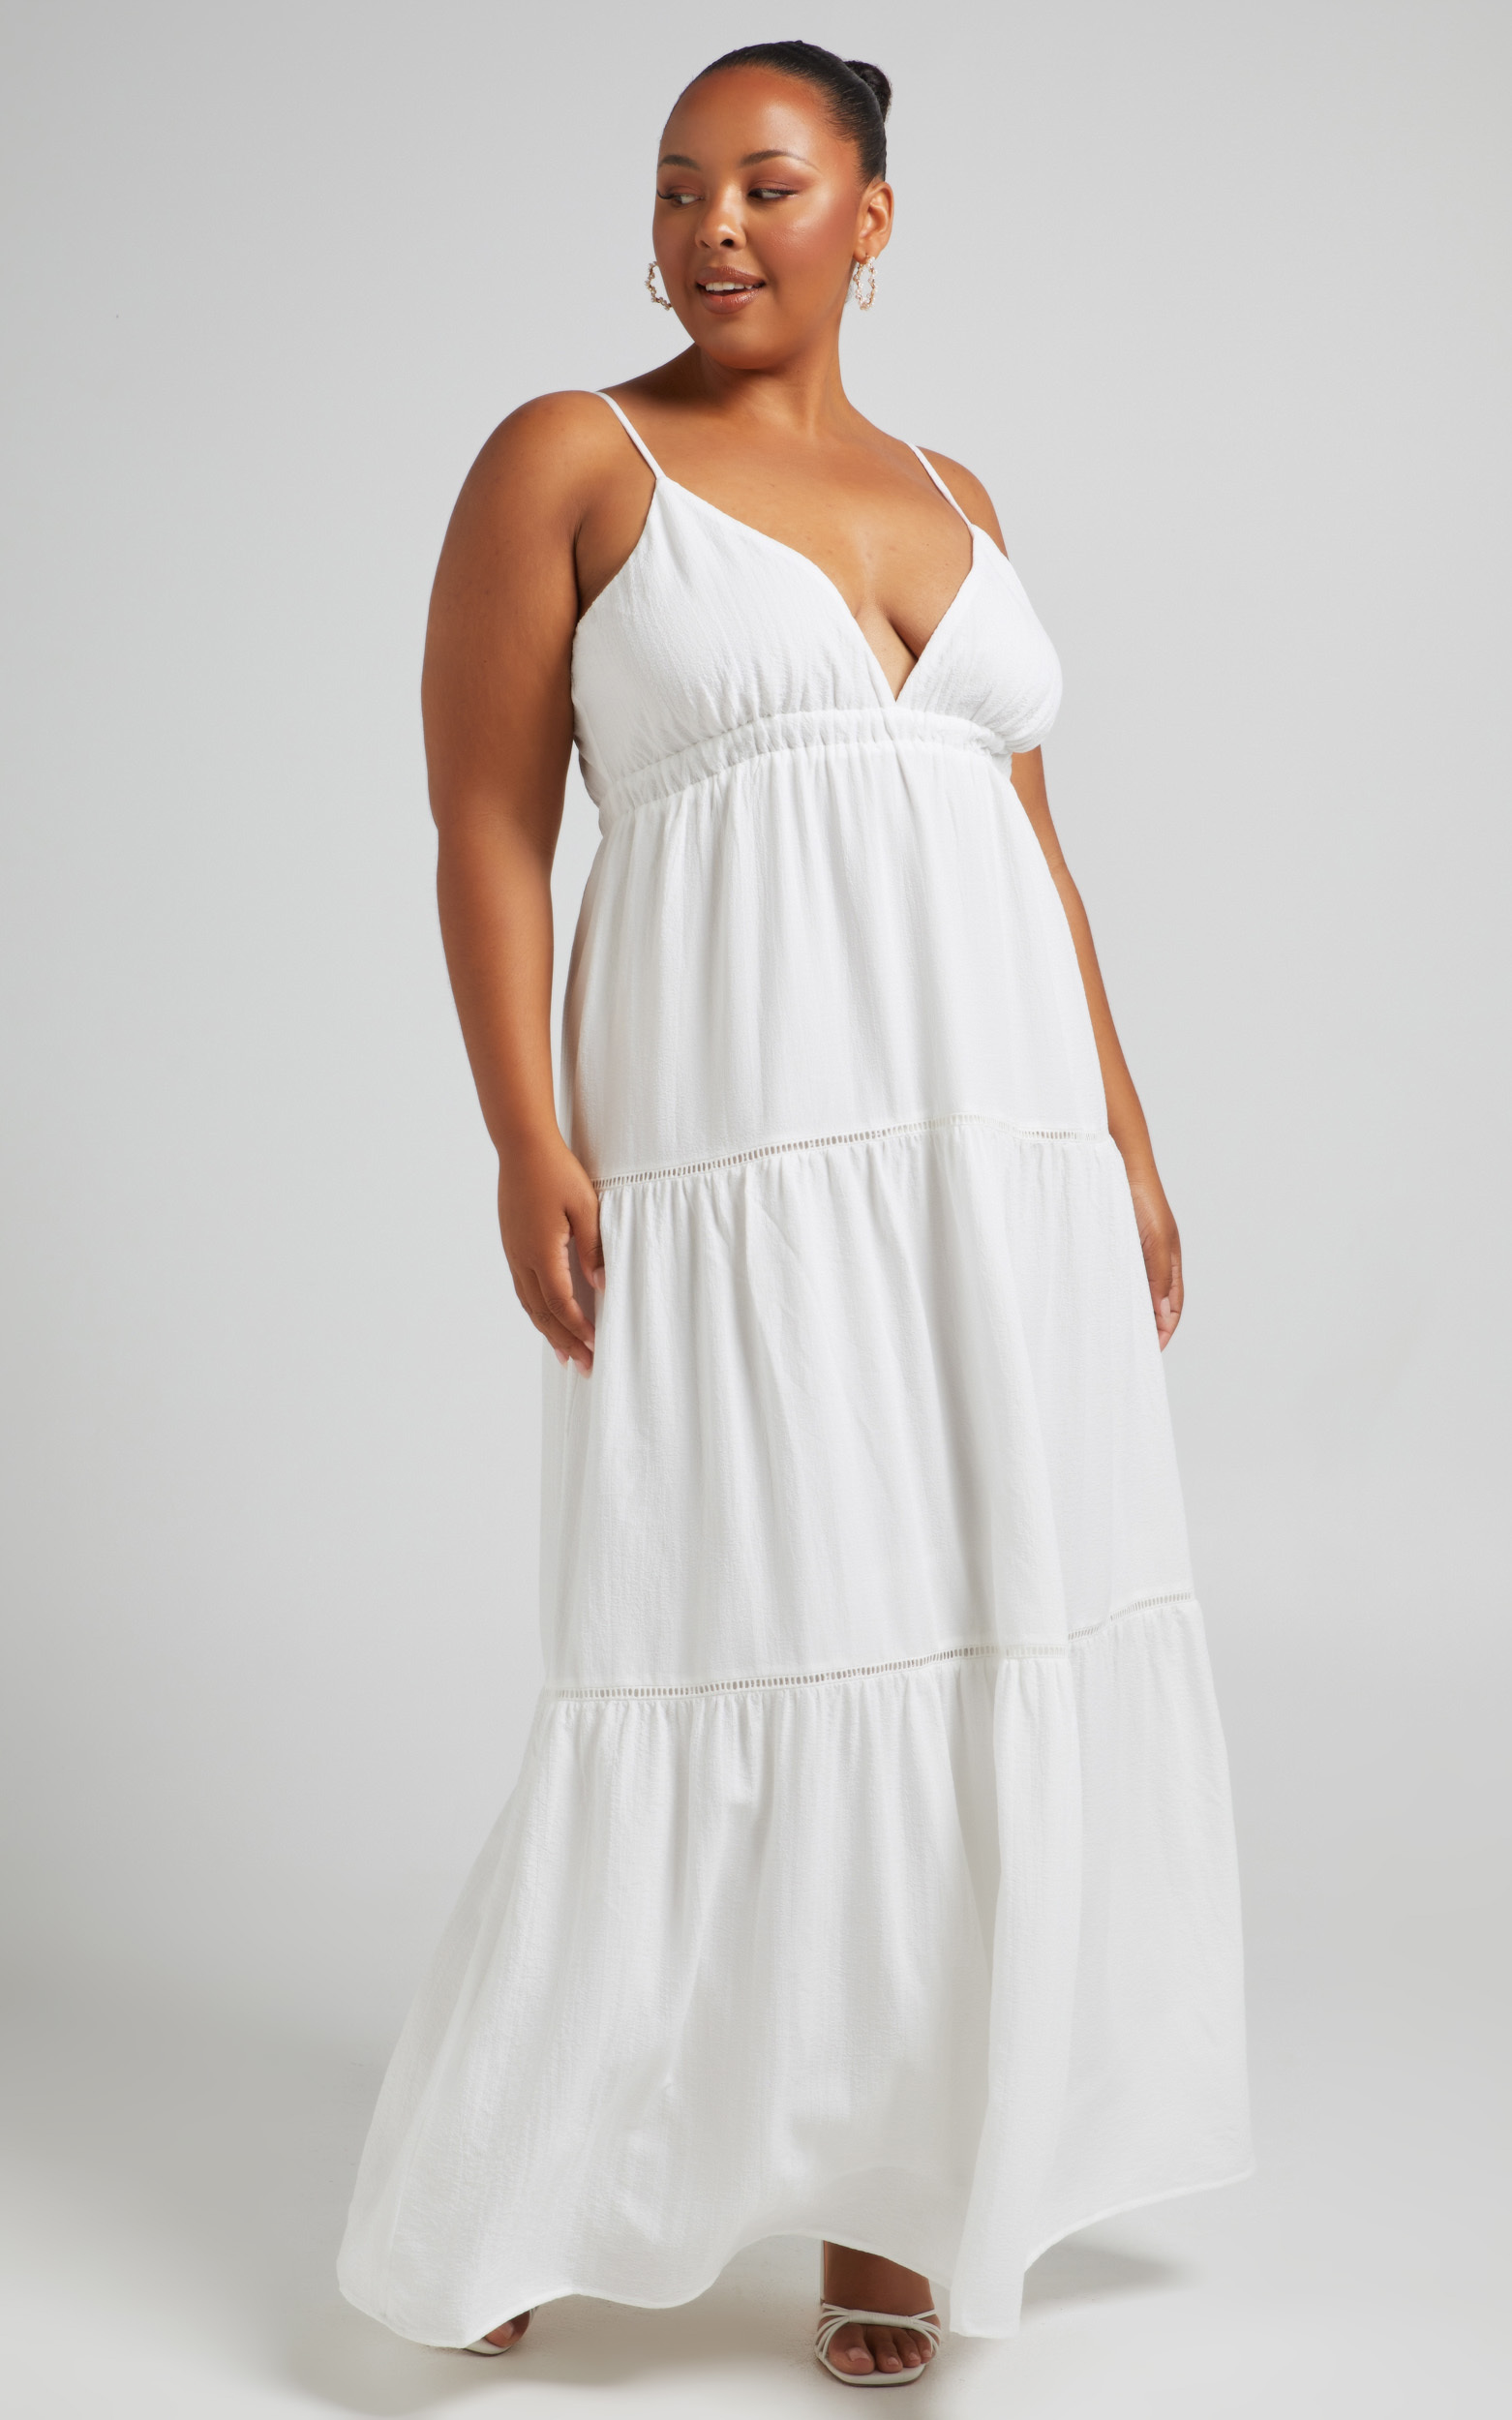 Alexandrina  Maxi Dress in White - 06, WHT2, hi-res image number null